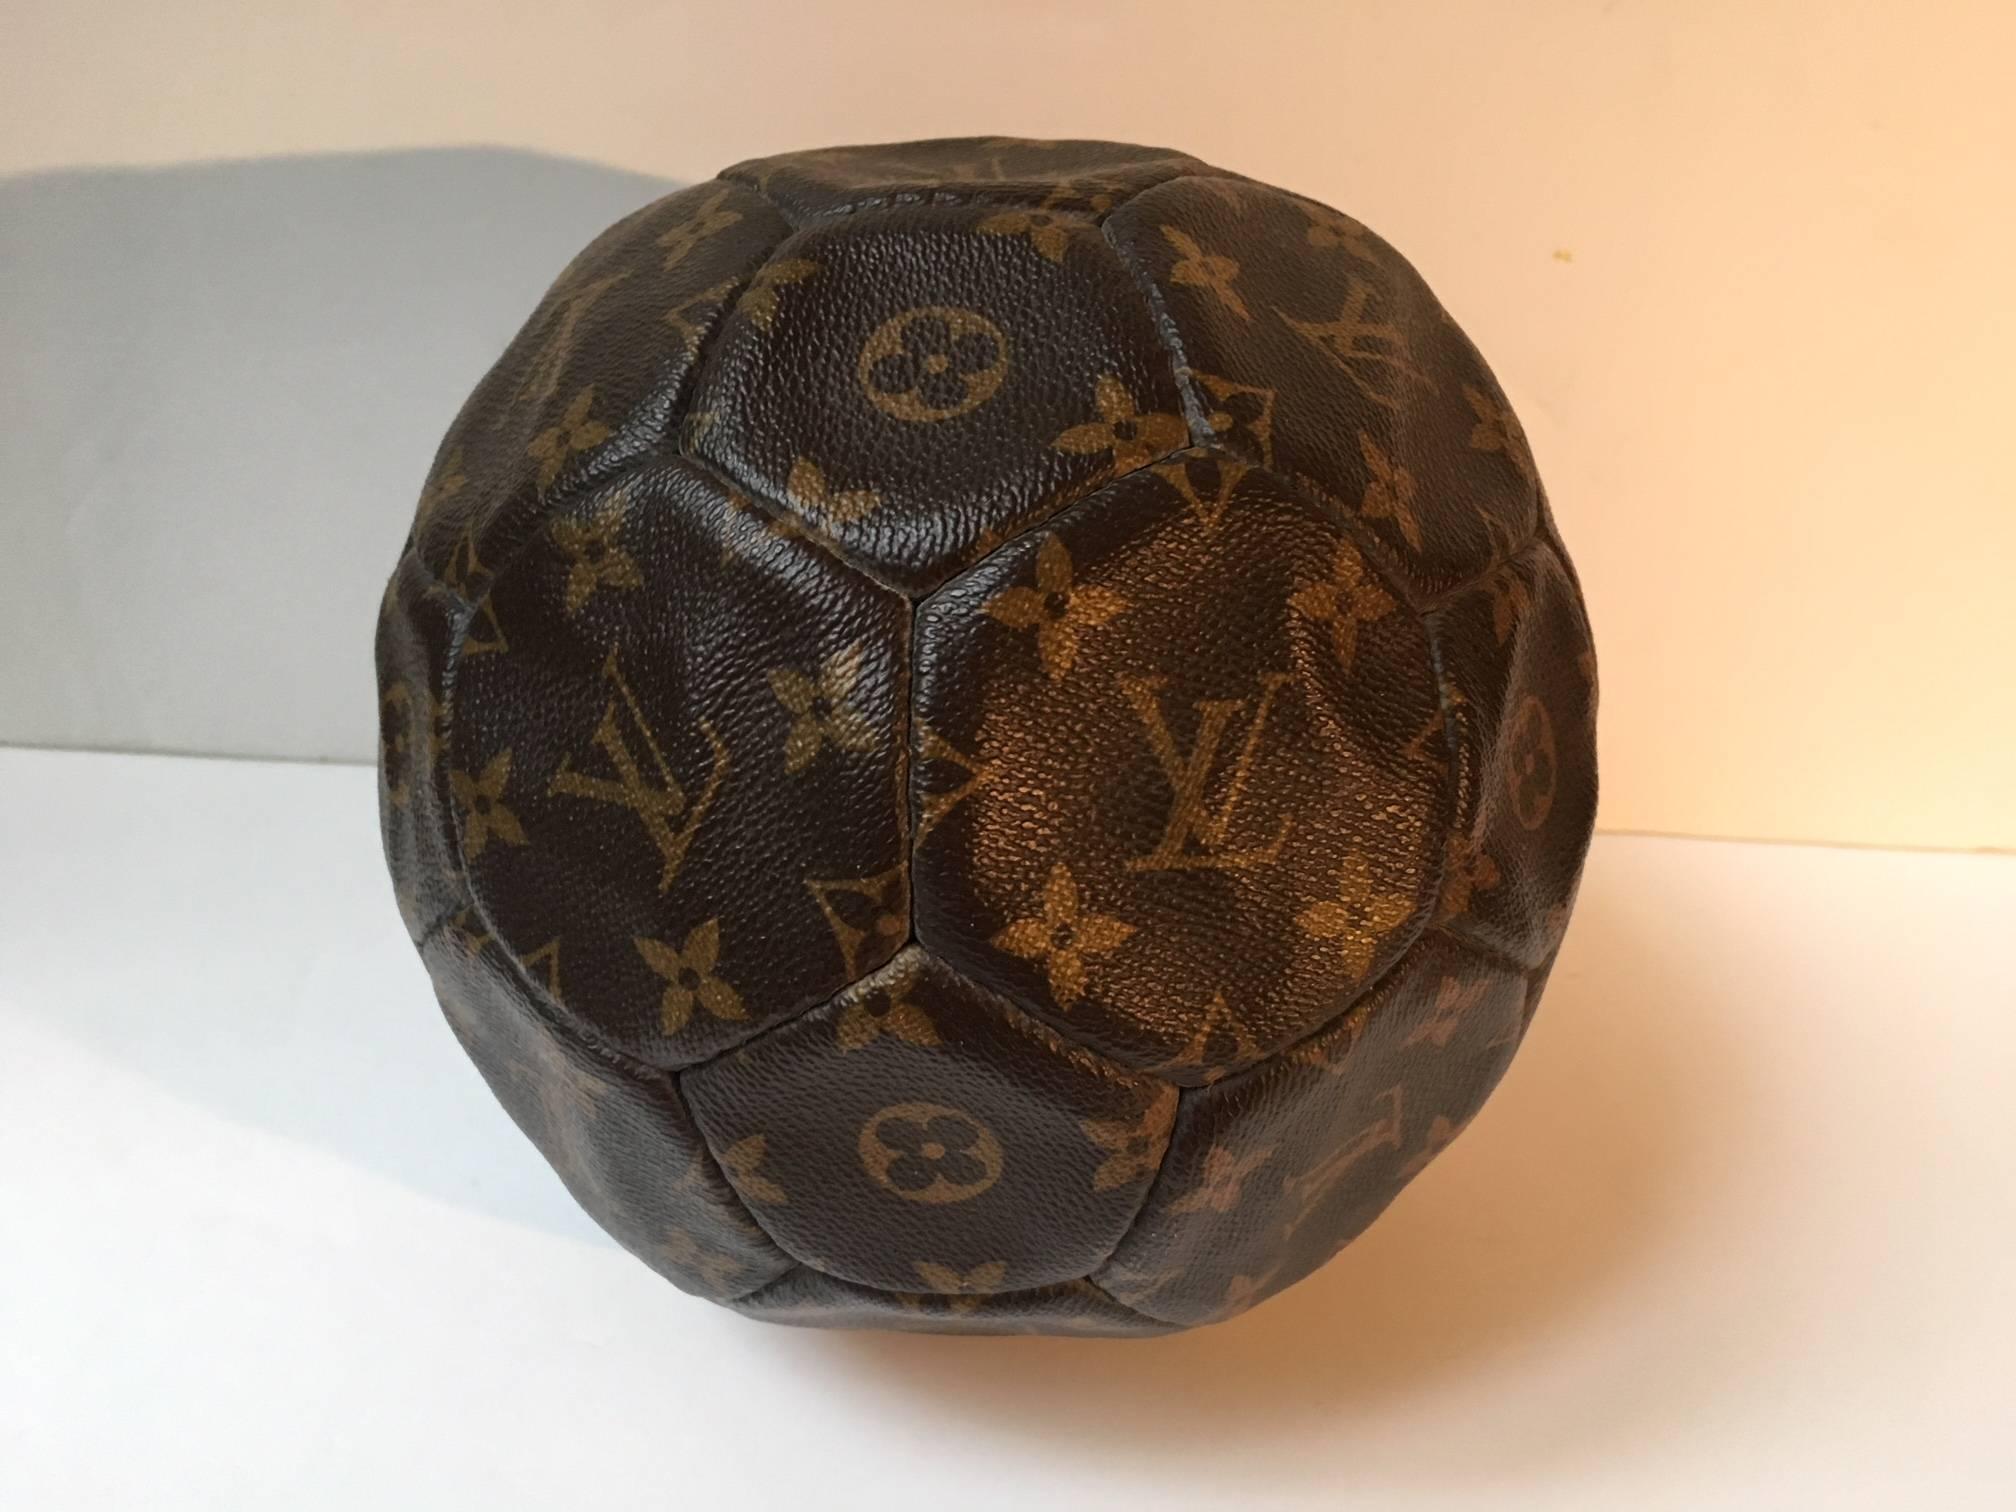 Black Louis Vuitton  rare Leather Soccer Ball, World Cup France 1998 Limited Edition 